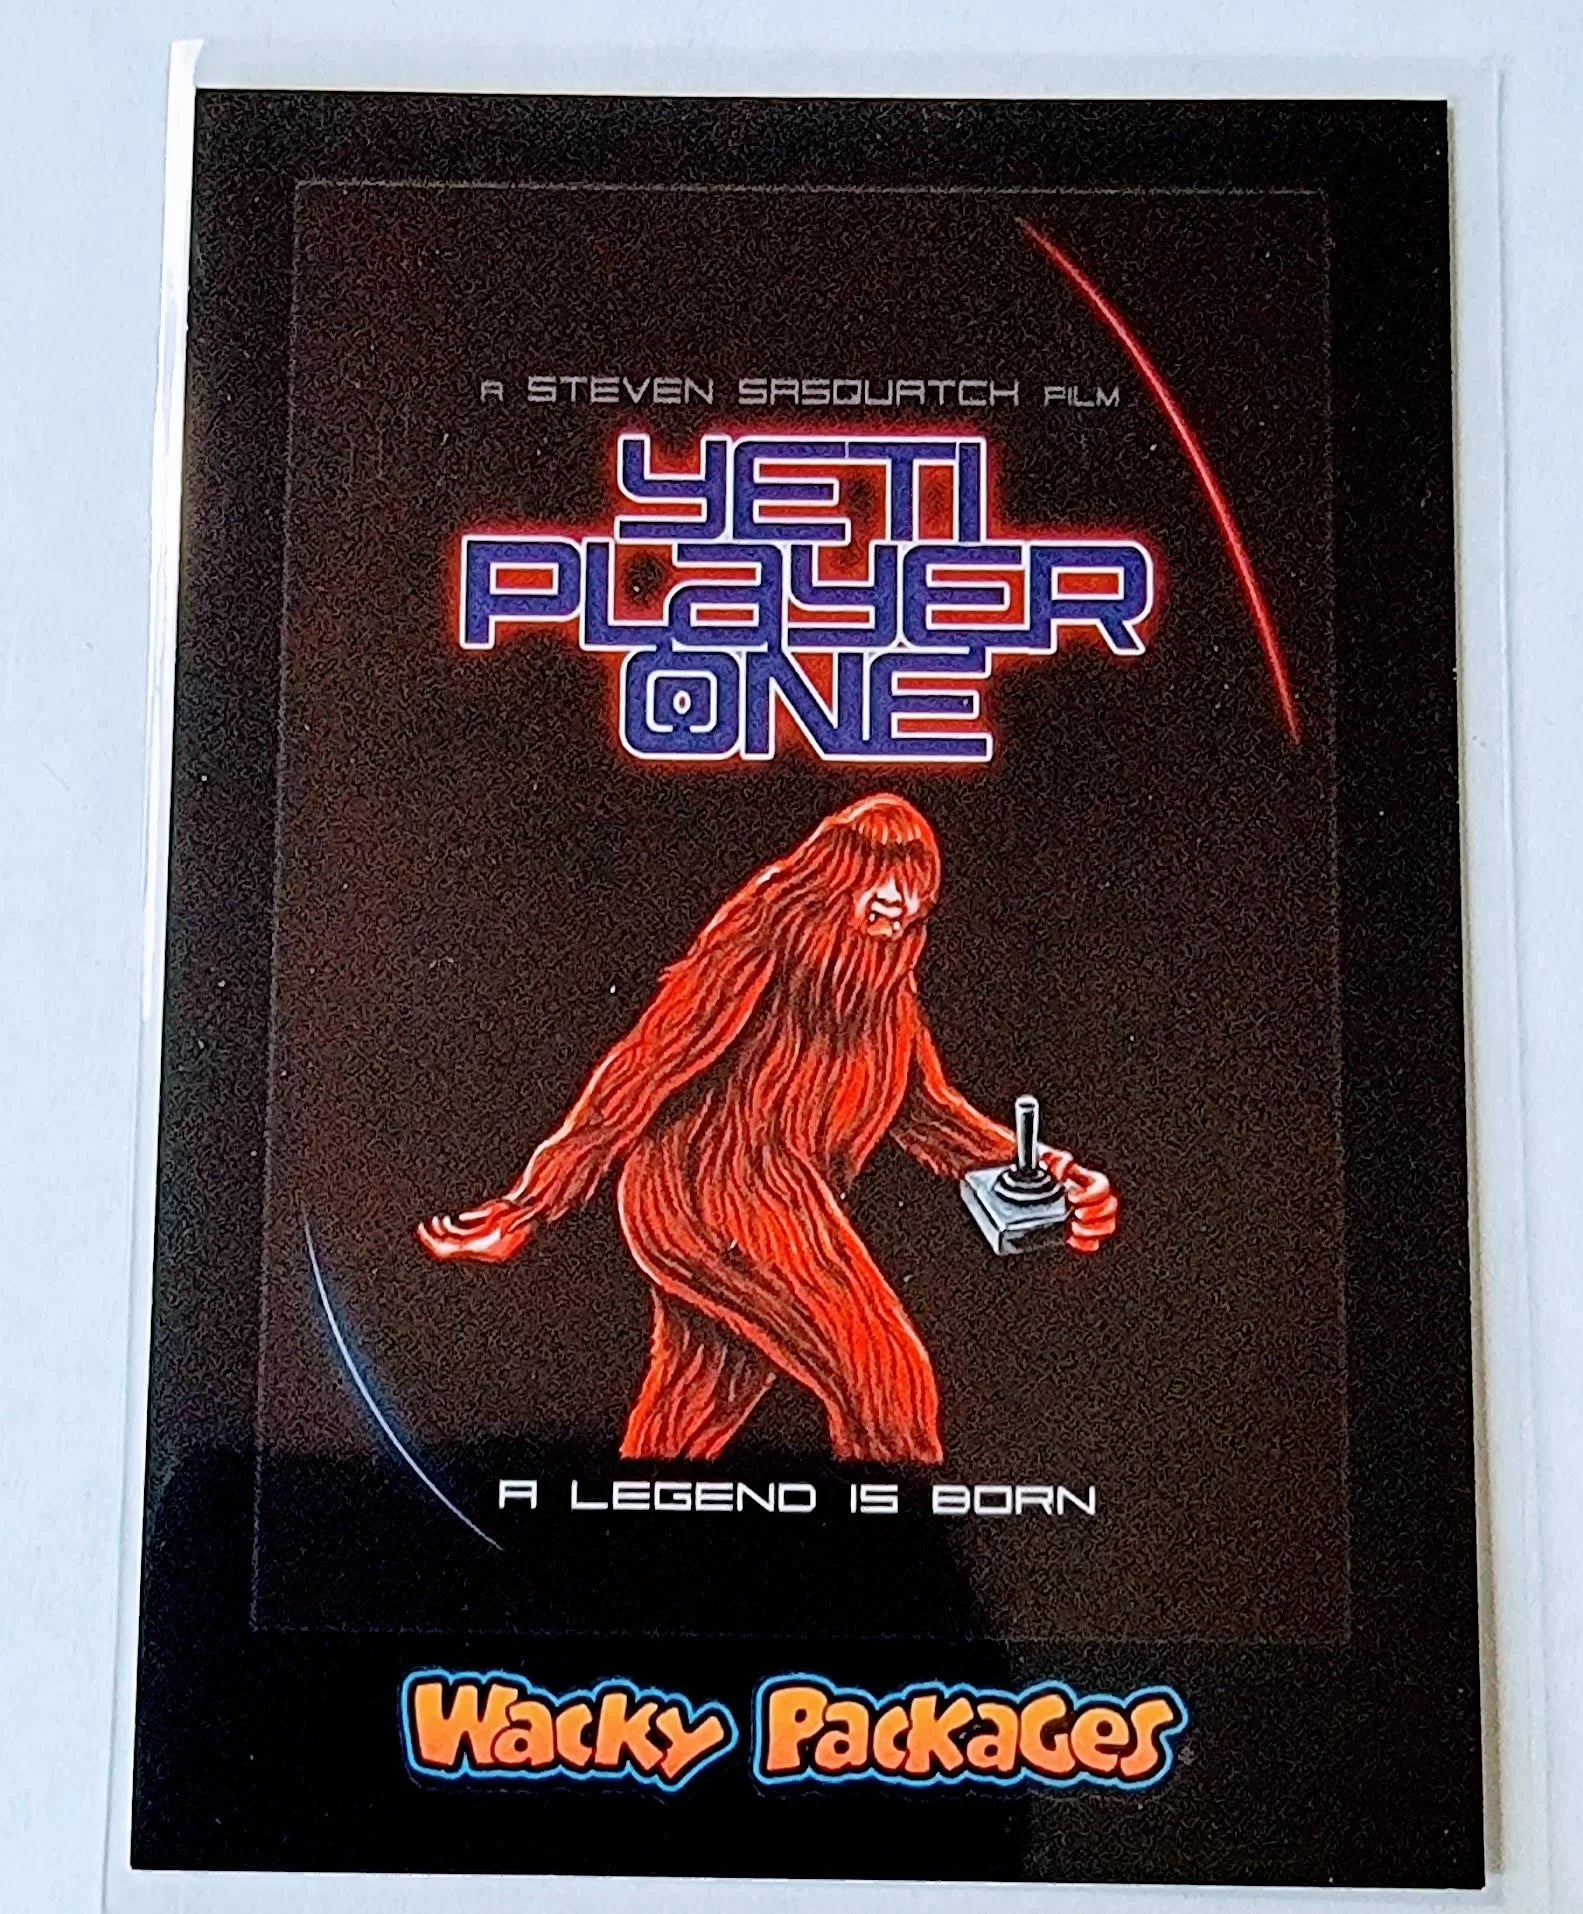 2018 Wacky Packages Go to the Movies Sci-Fi Film Yeti Player One sticker Trading Card MCSC1 simple Xclusive Collectibles   